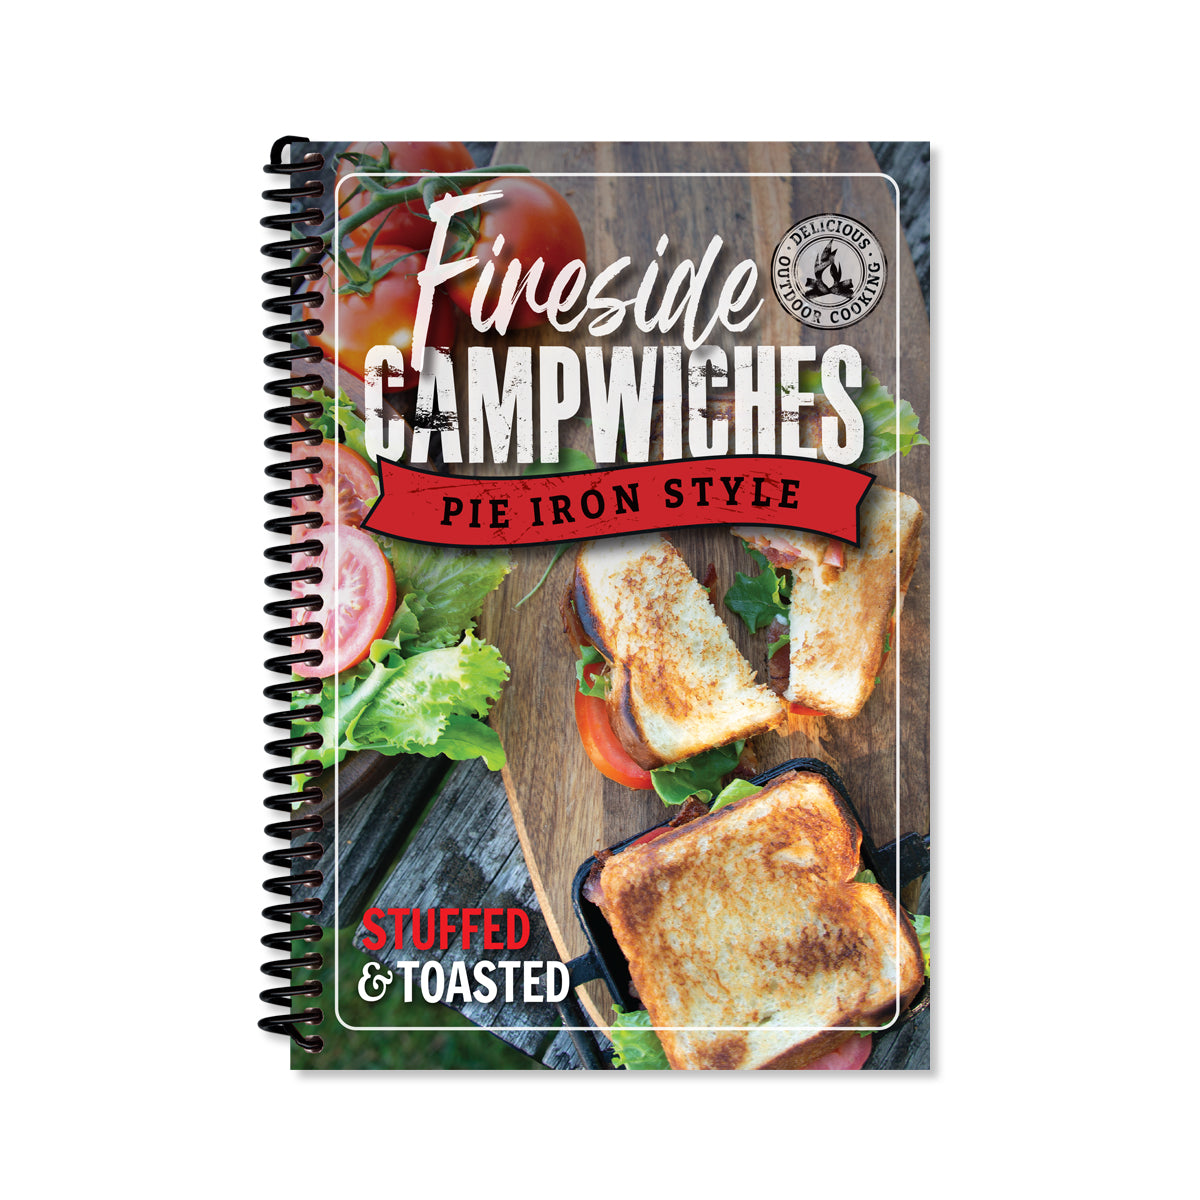 Fireside Campwiches book cover. Pie Iron Style, stuffed and toasted.